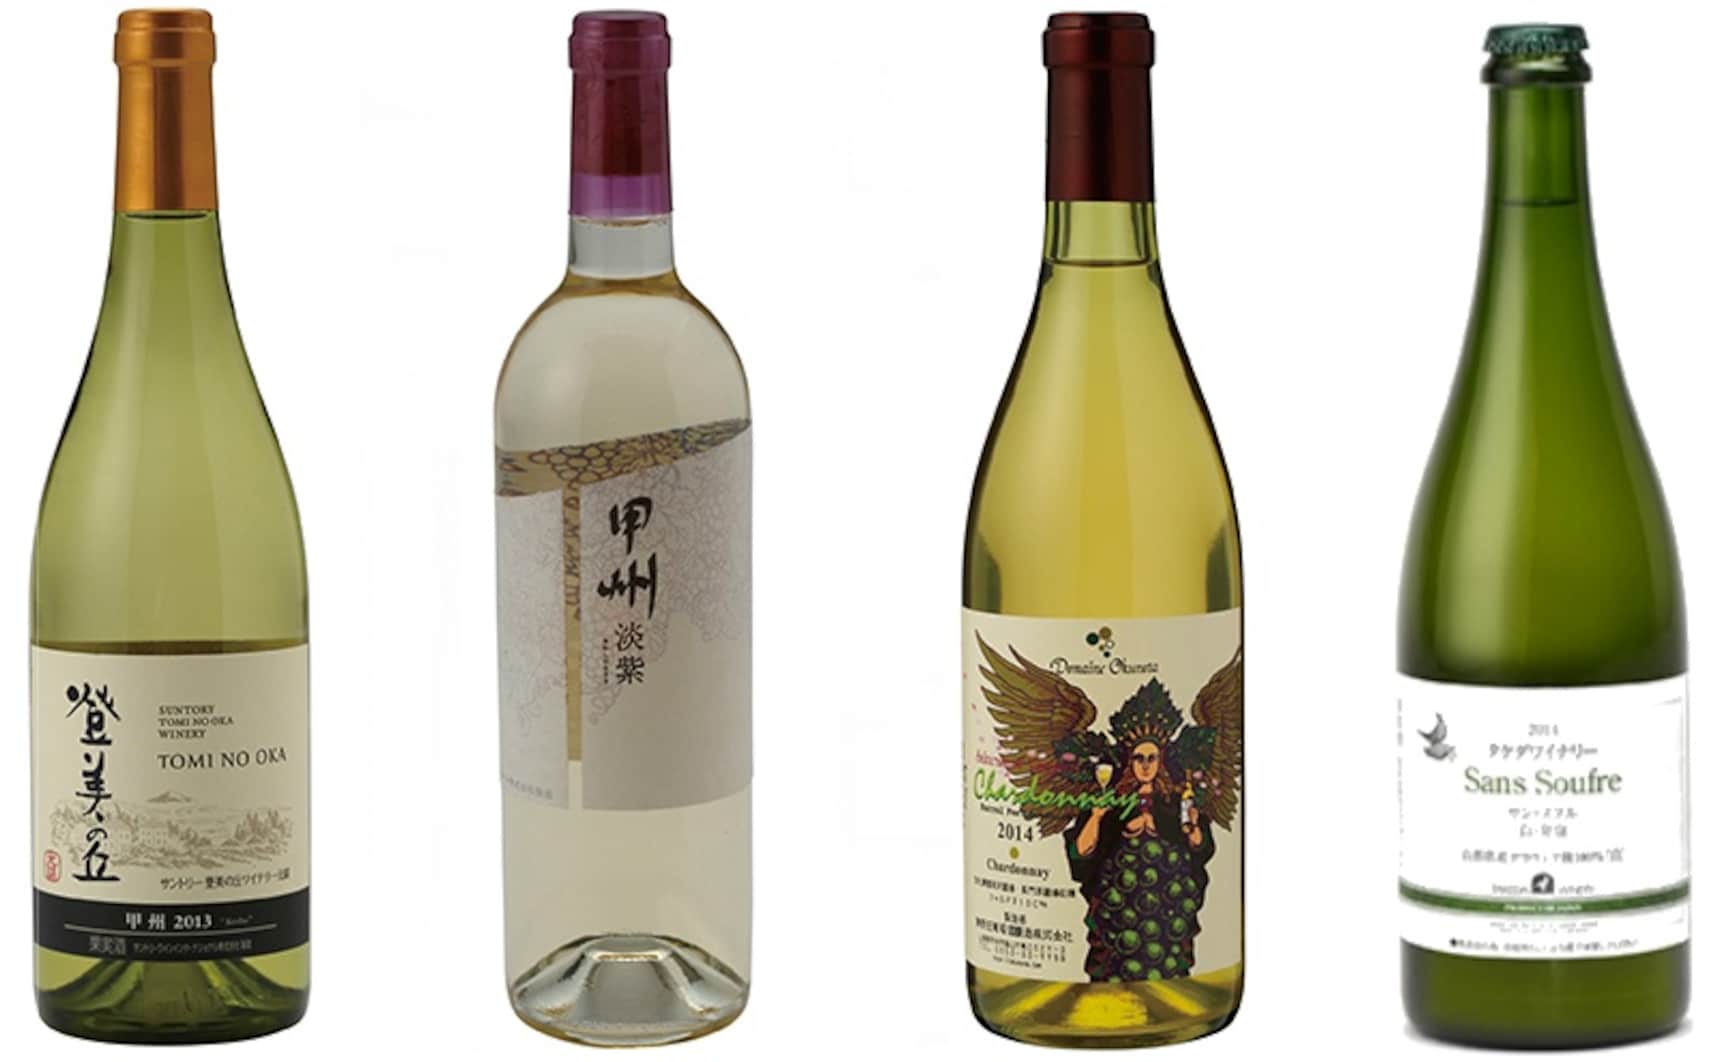 4 Japanese Wines from The Wonder 500™